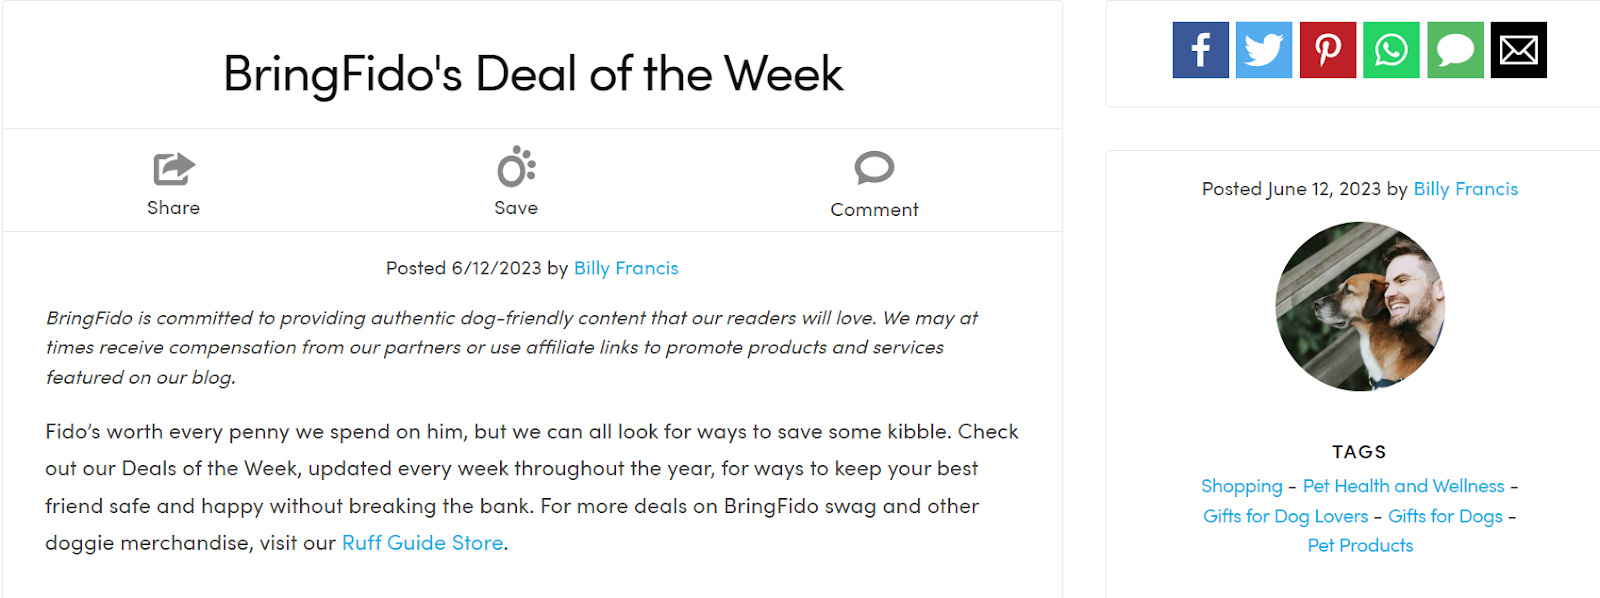 Screenshot of "BringFido's deal of the week" blog post authored by Billy Francis